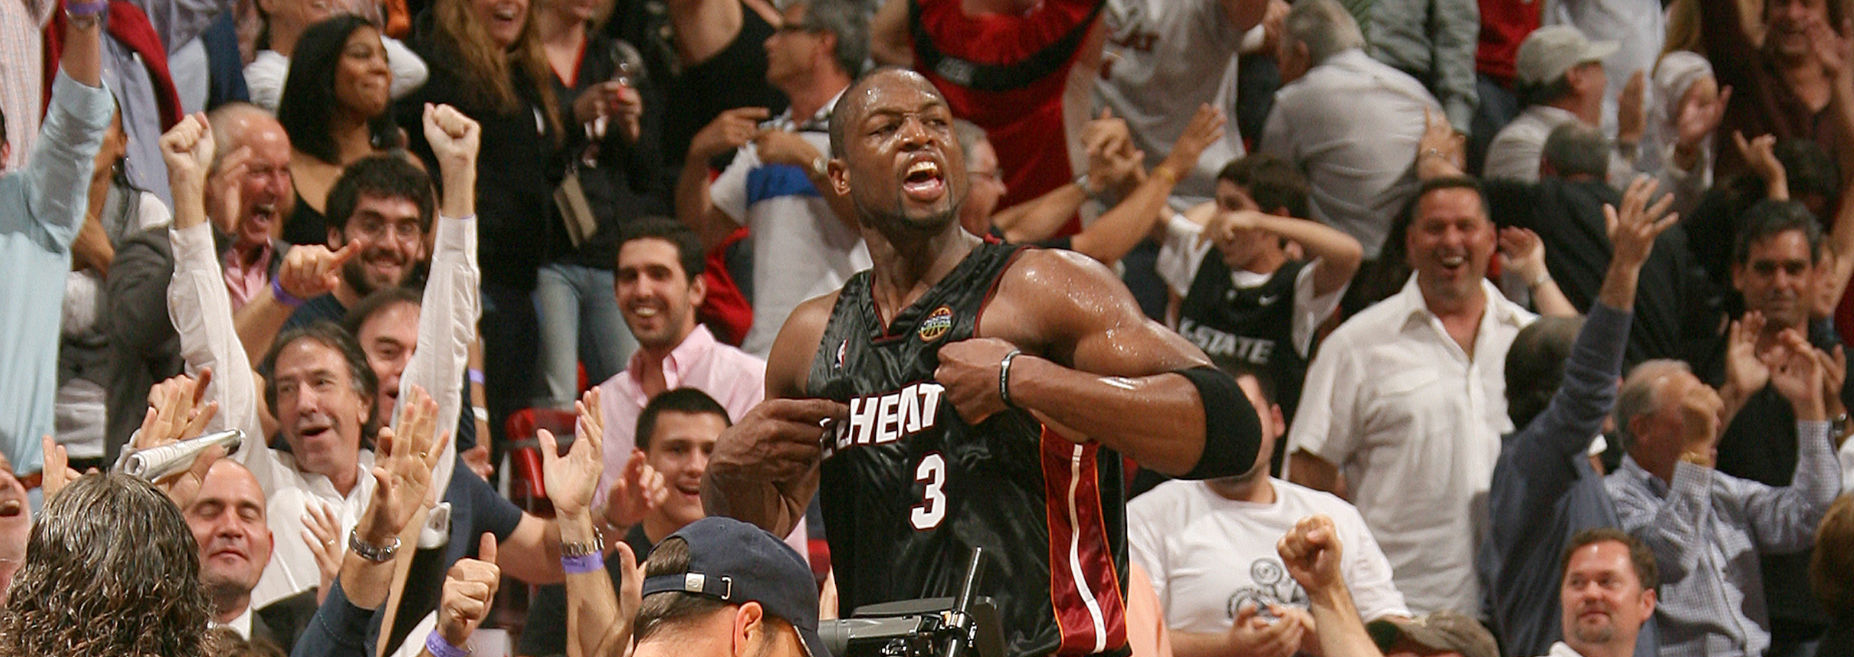 Three moments that capture the greatness of Dwyane Wade | NBA.com ...